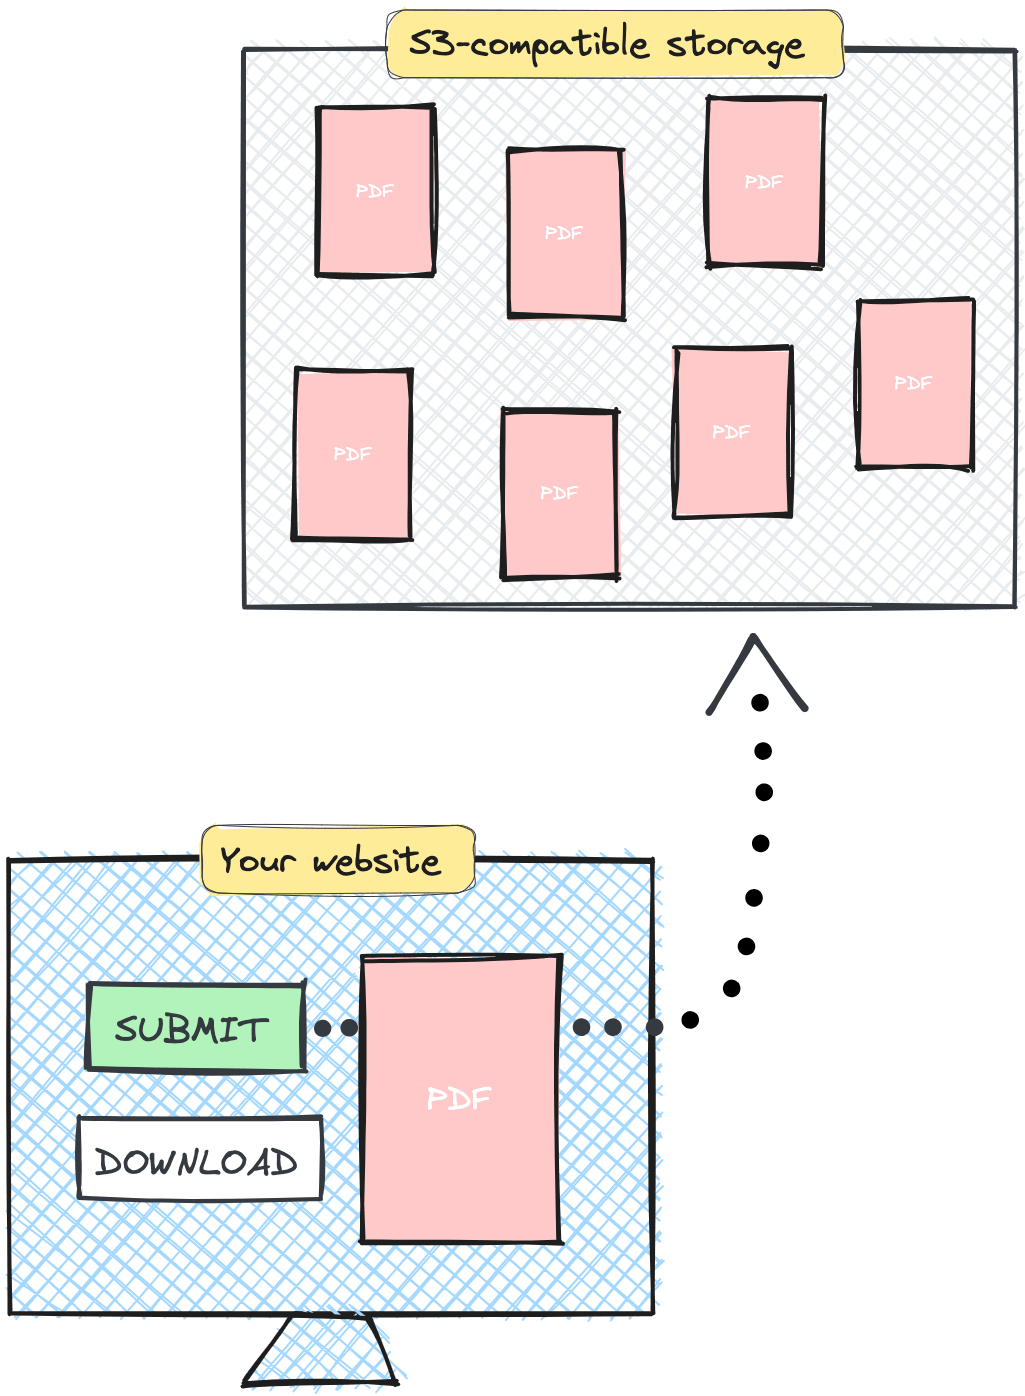 Illustration of SimplePDF flow when submitting PDFs: from the website securely to the storage of customers (BYOB)